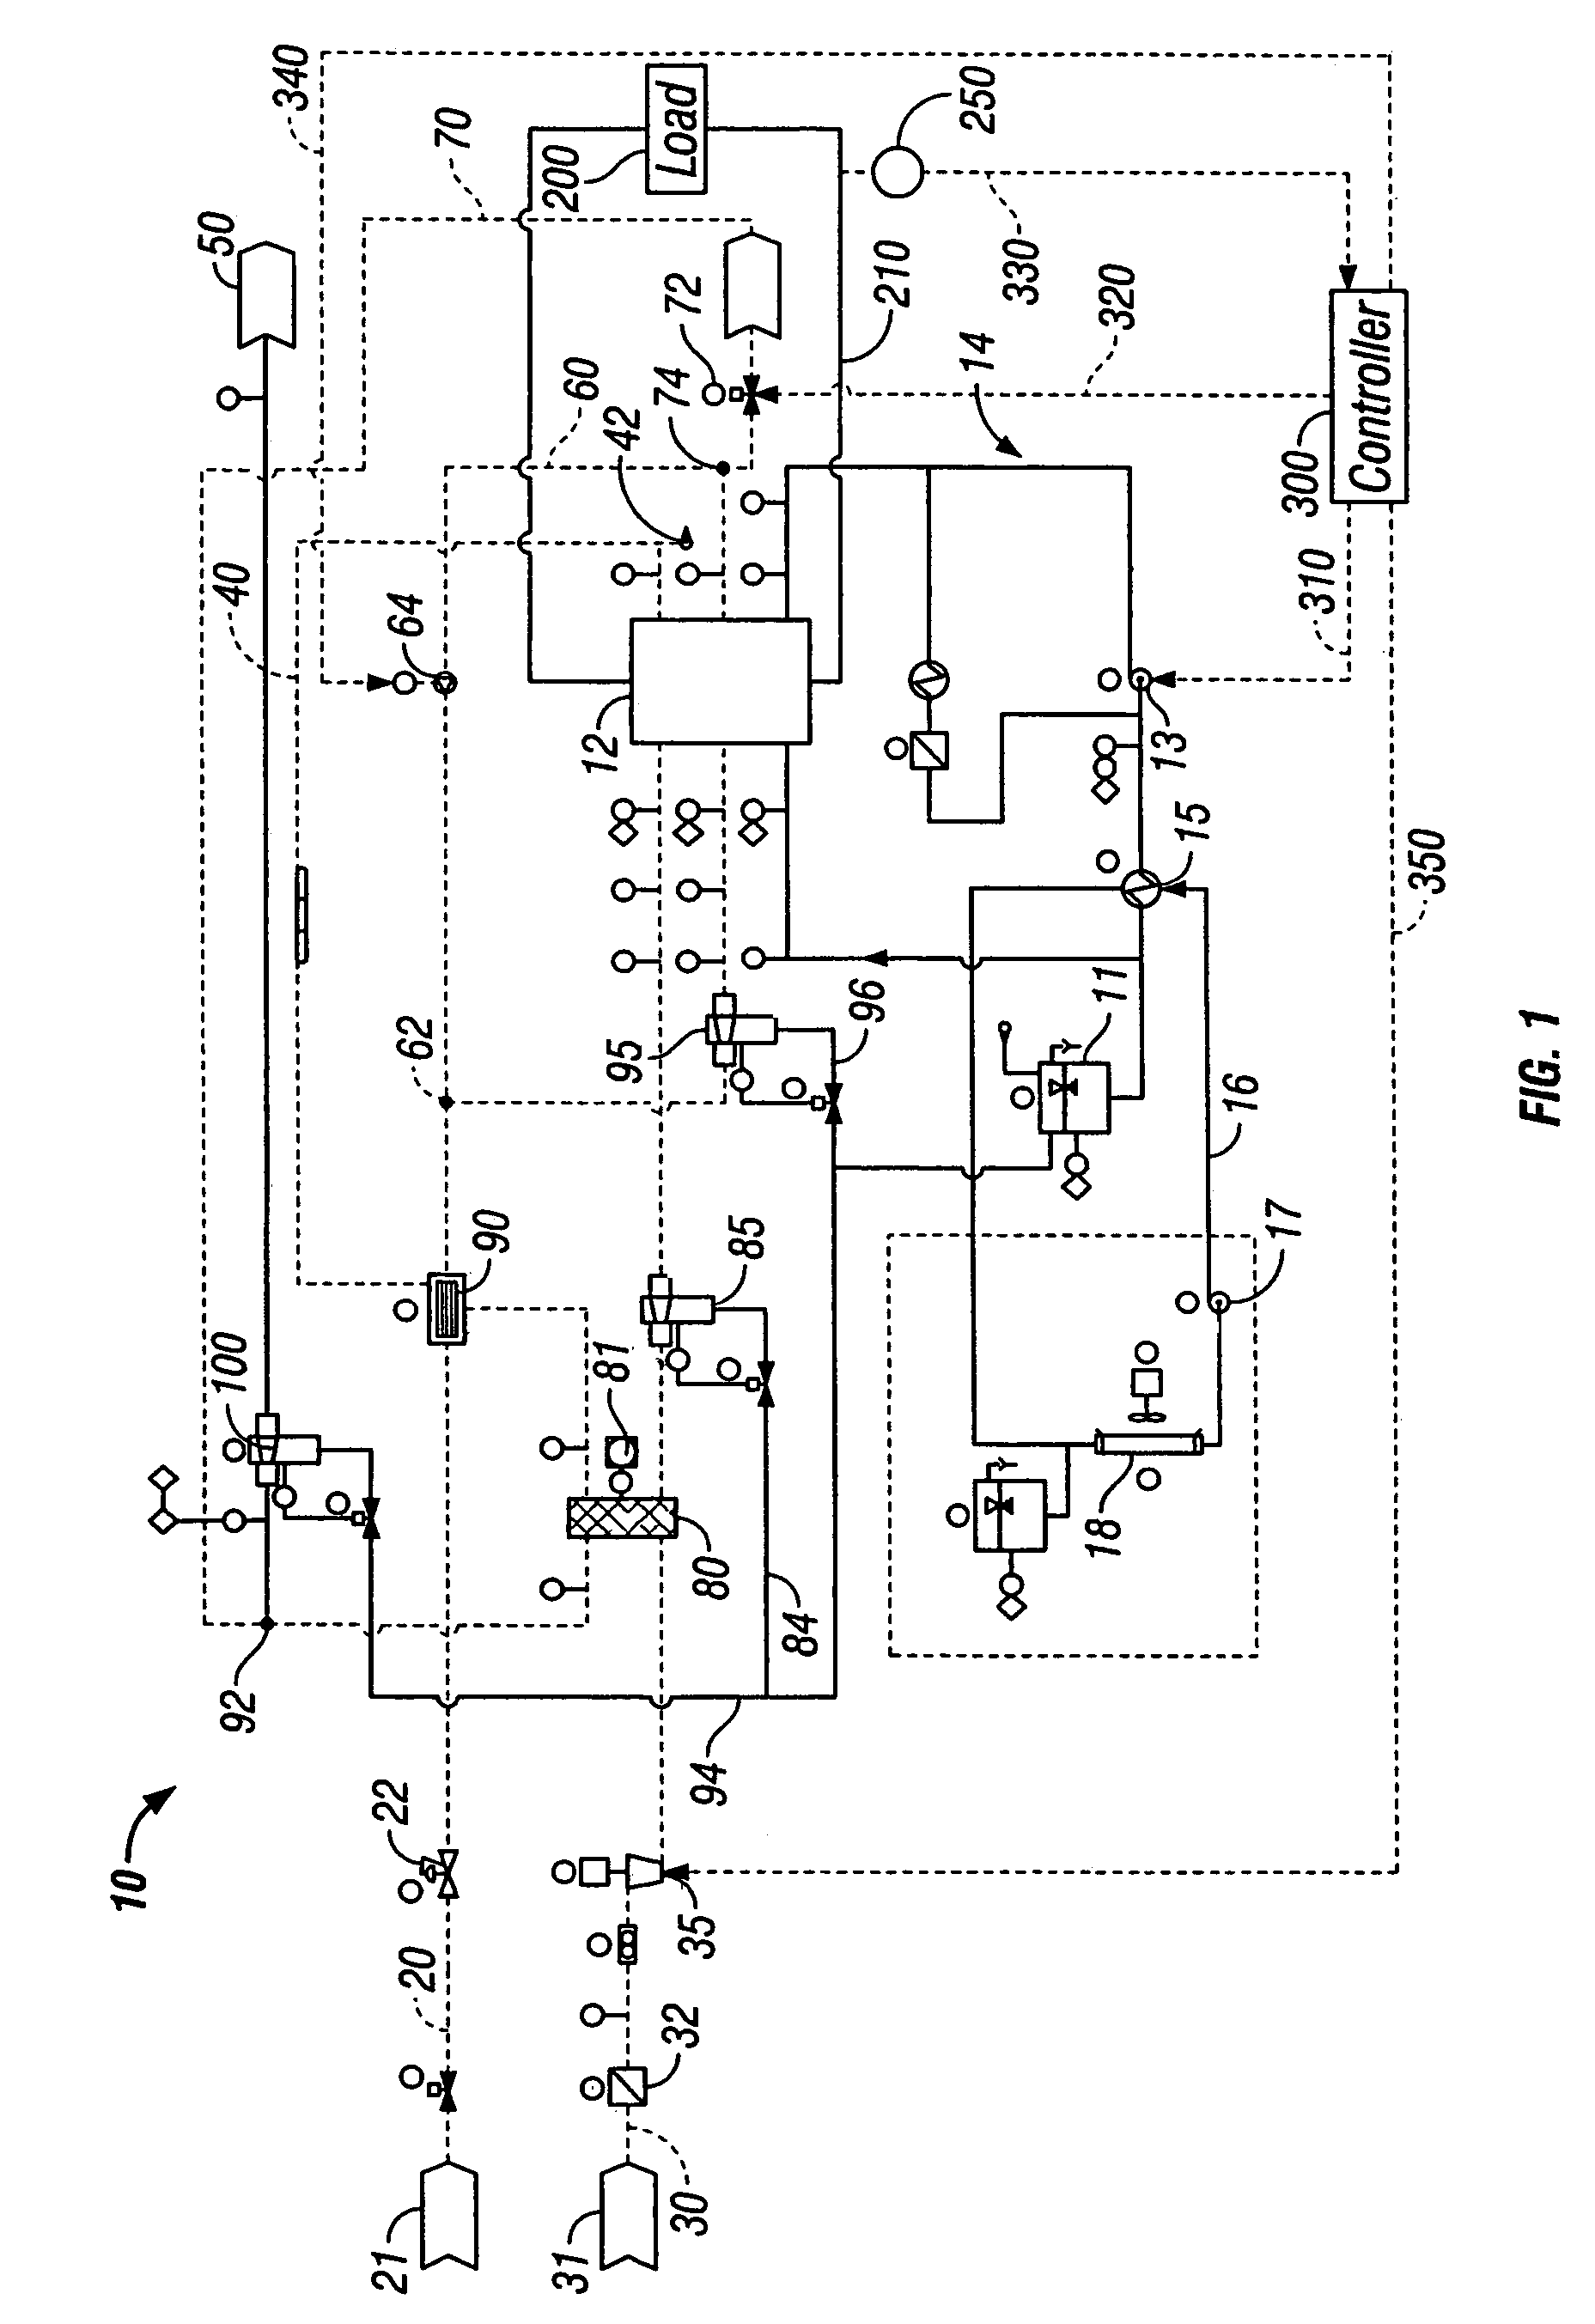 Fuel cell system and method of operation to reduce parasitic load of fuel cell peripherals